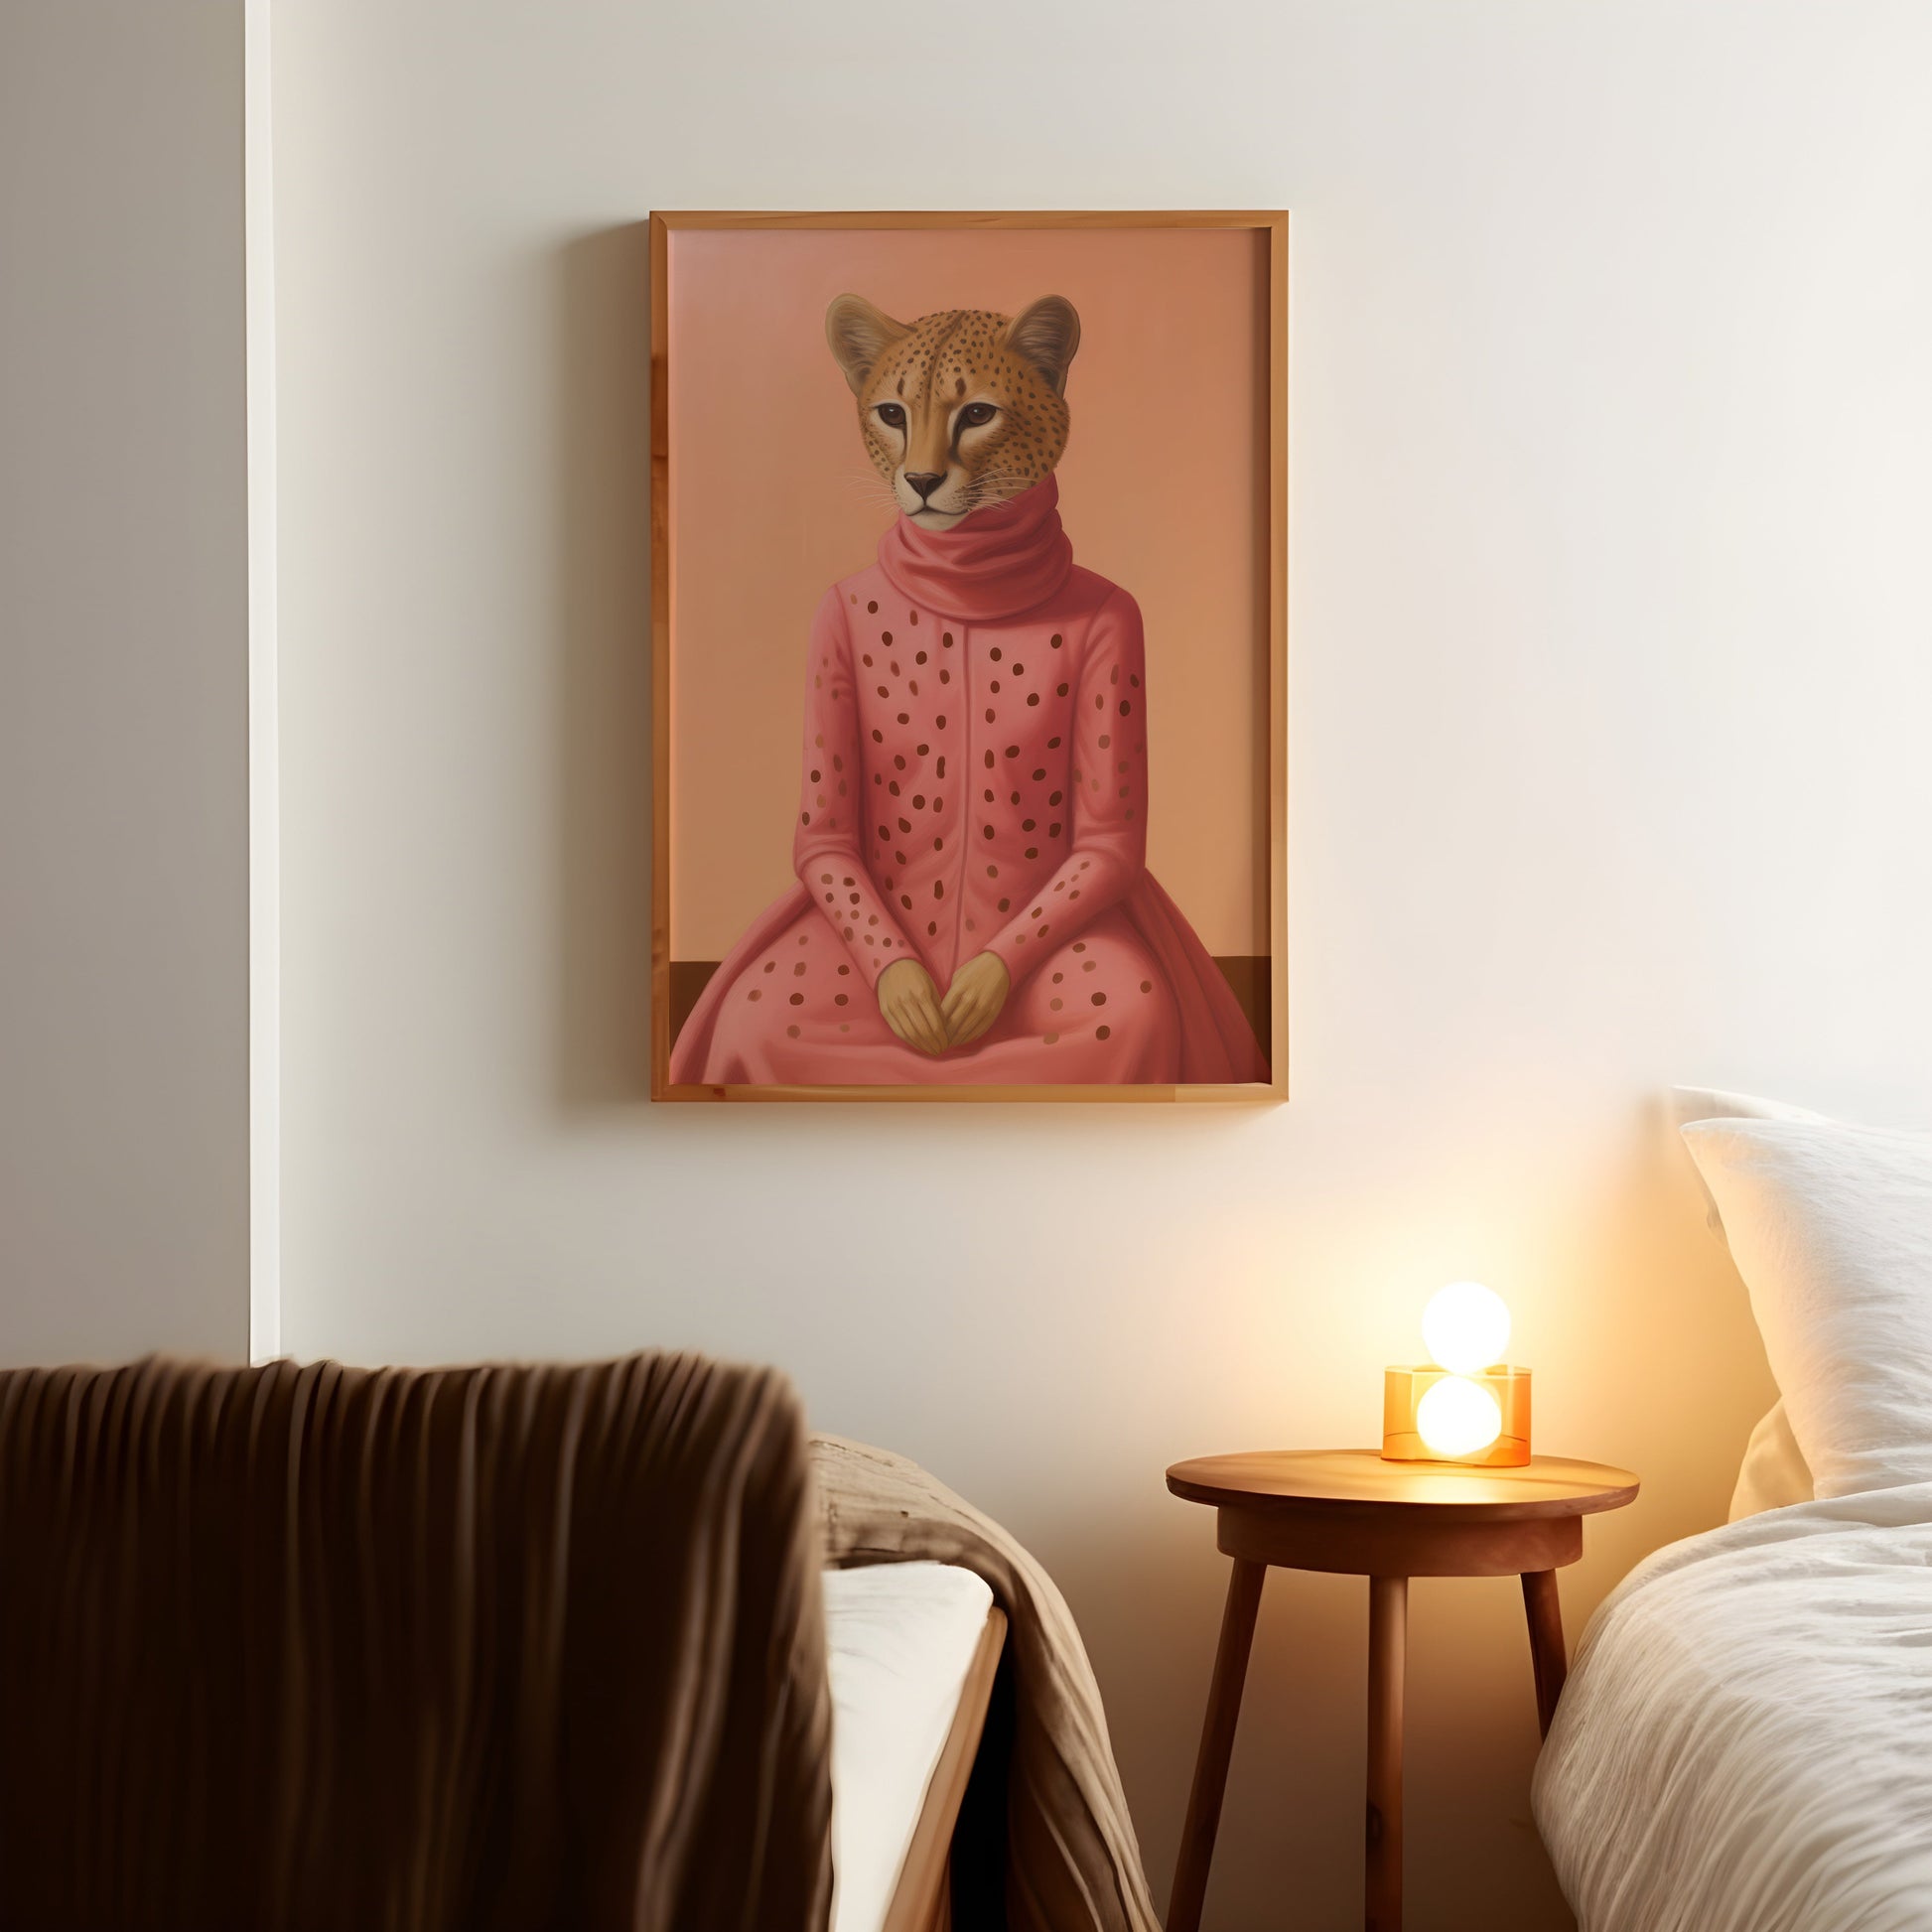 a picture of a cat in a pink dress on a wall above a bed